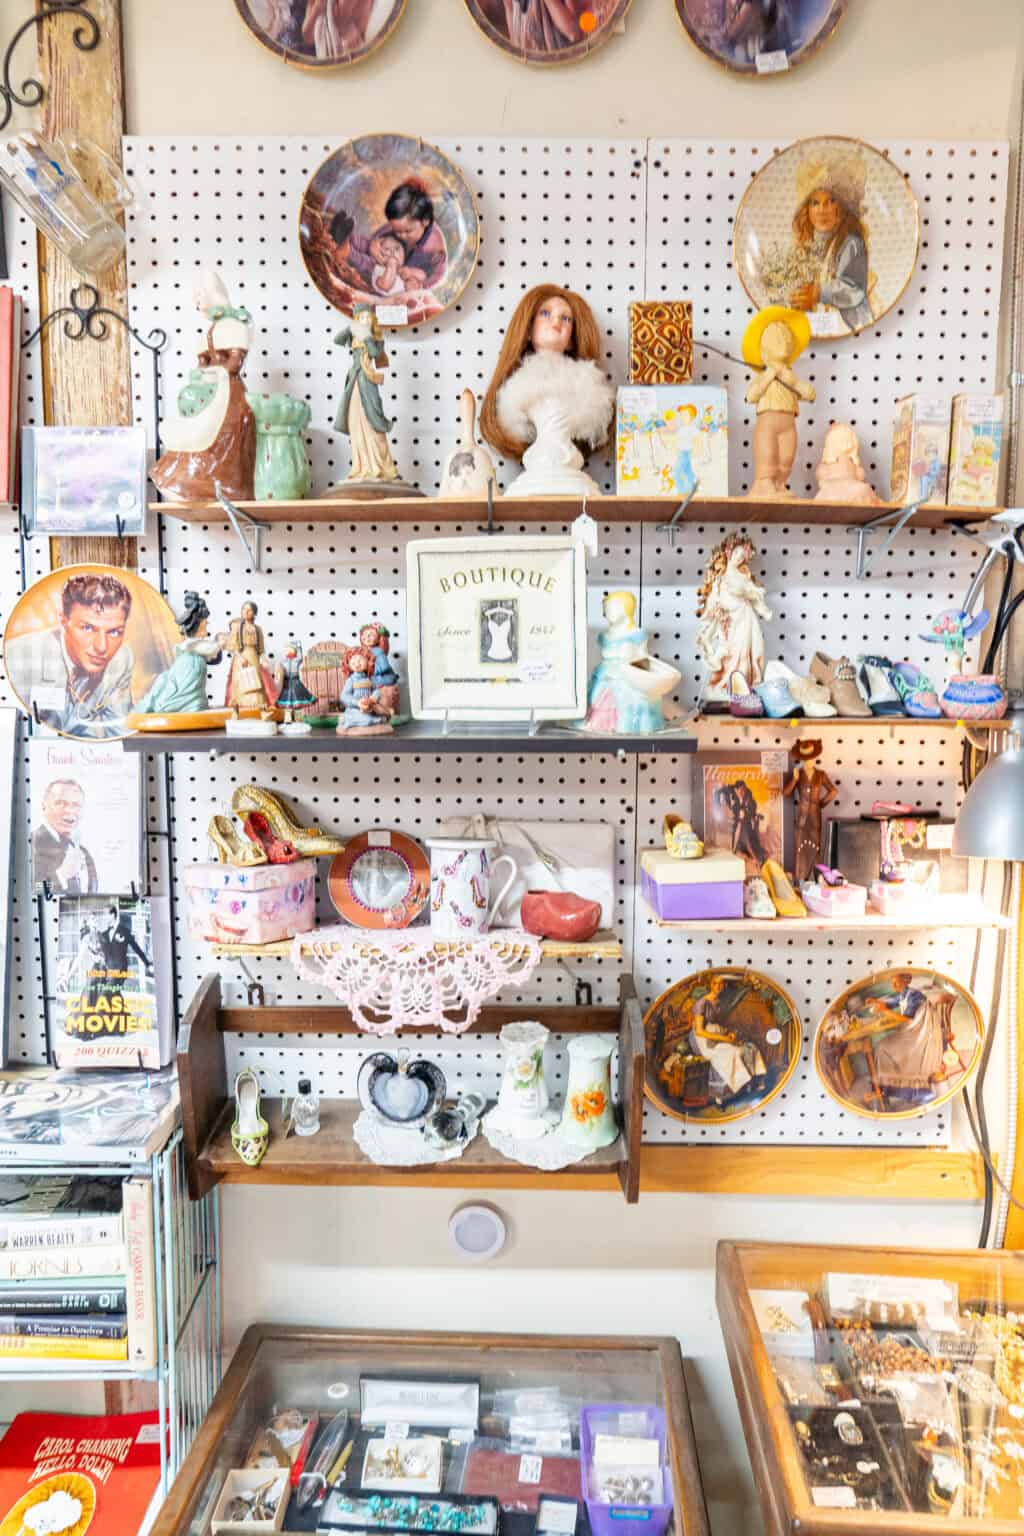 a shelf with figurines and other objects on it